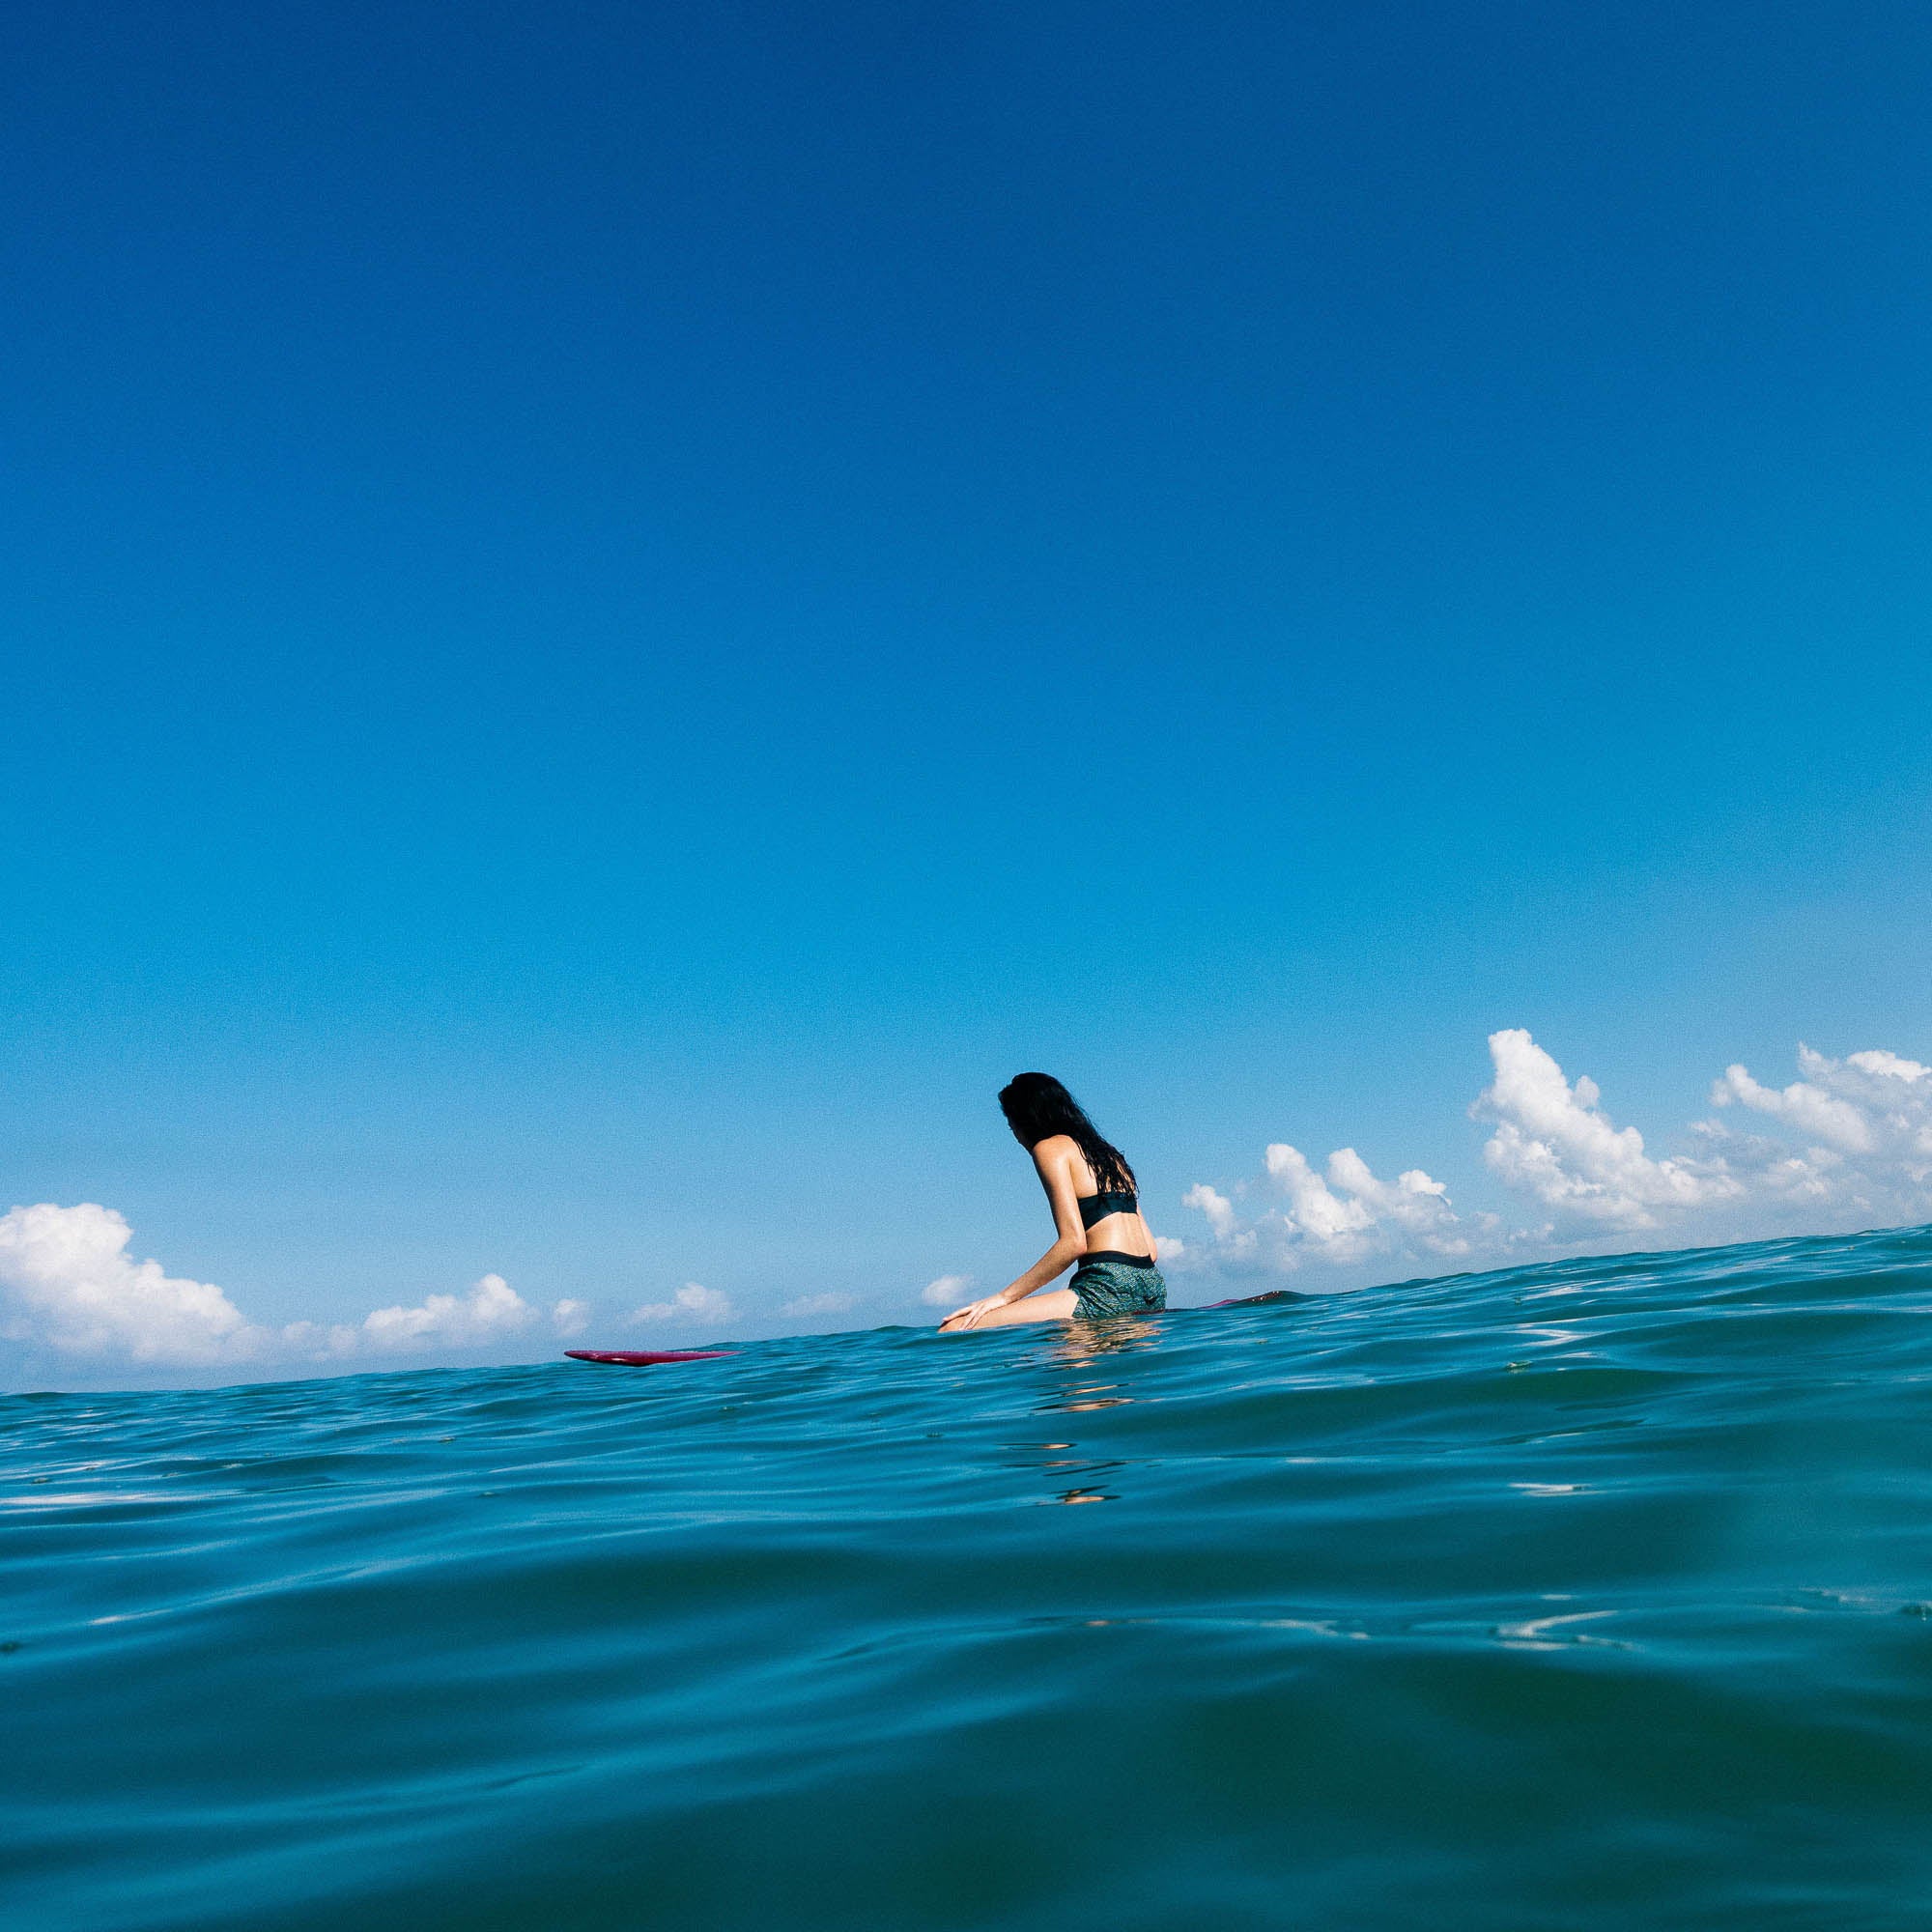 Spontaneous Surf: Lessons in forgoing plans and surfing the unexpected